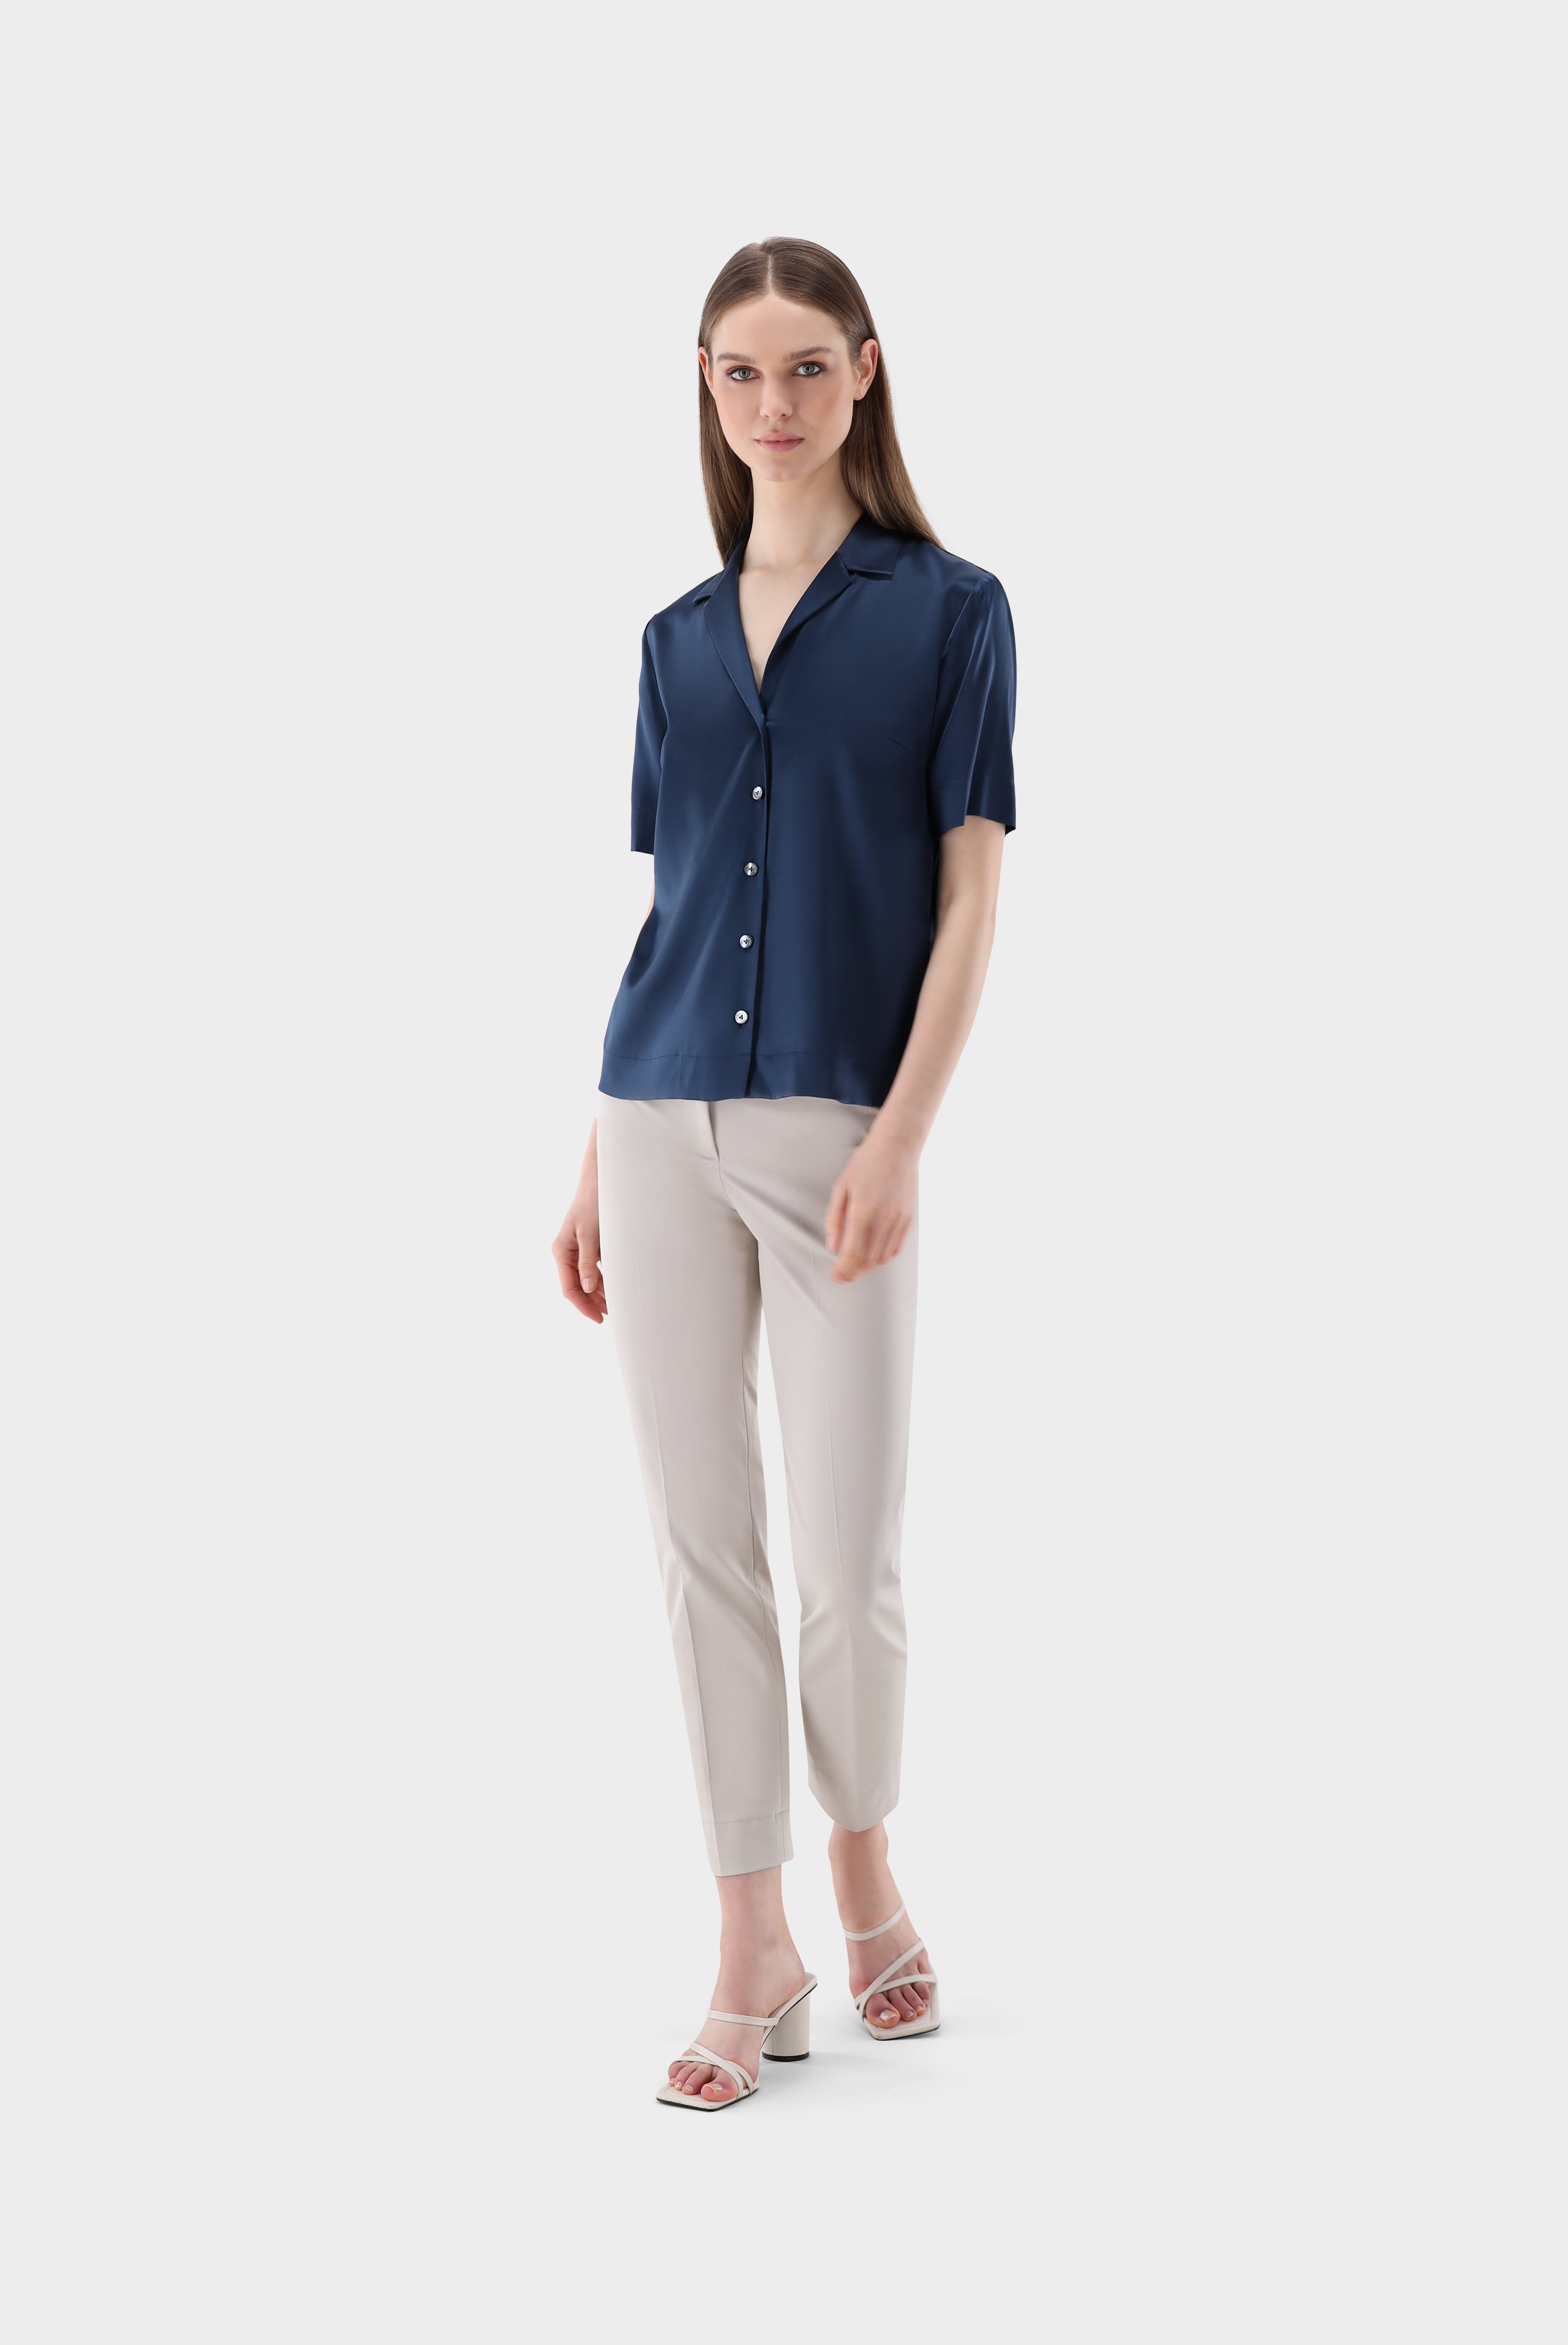 Casual Blouses+Blouse with Camp Collar+05.529C.56.155152.780.34